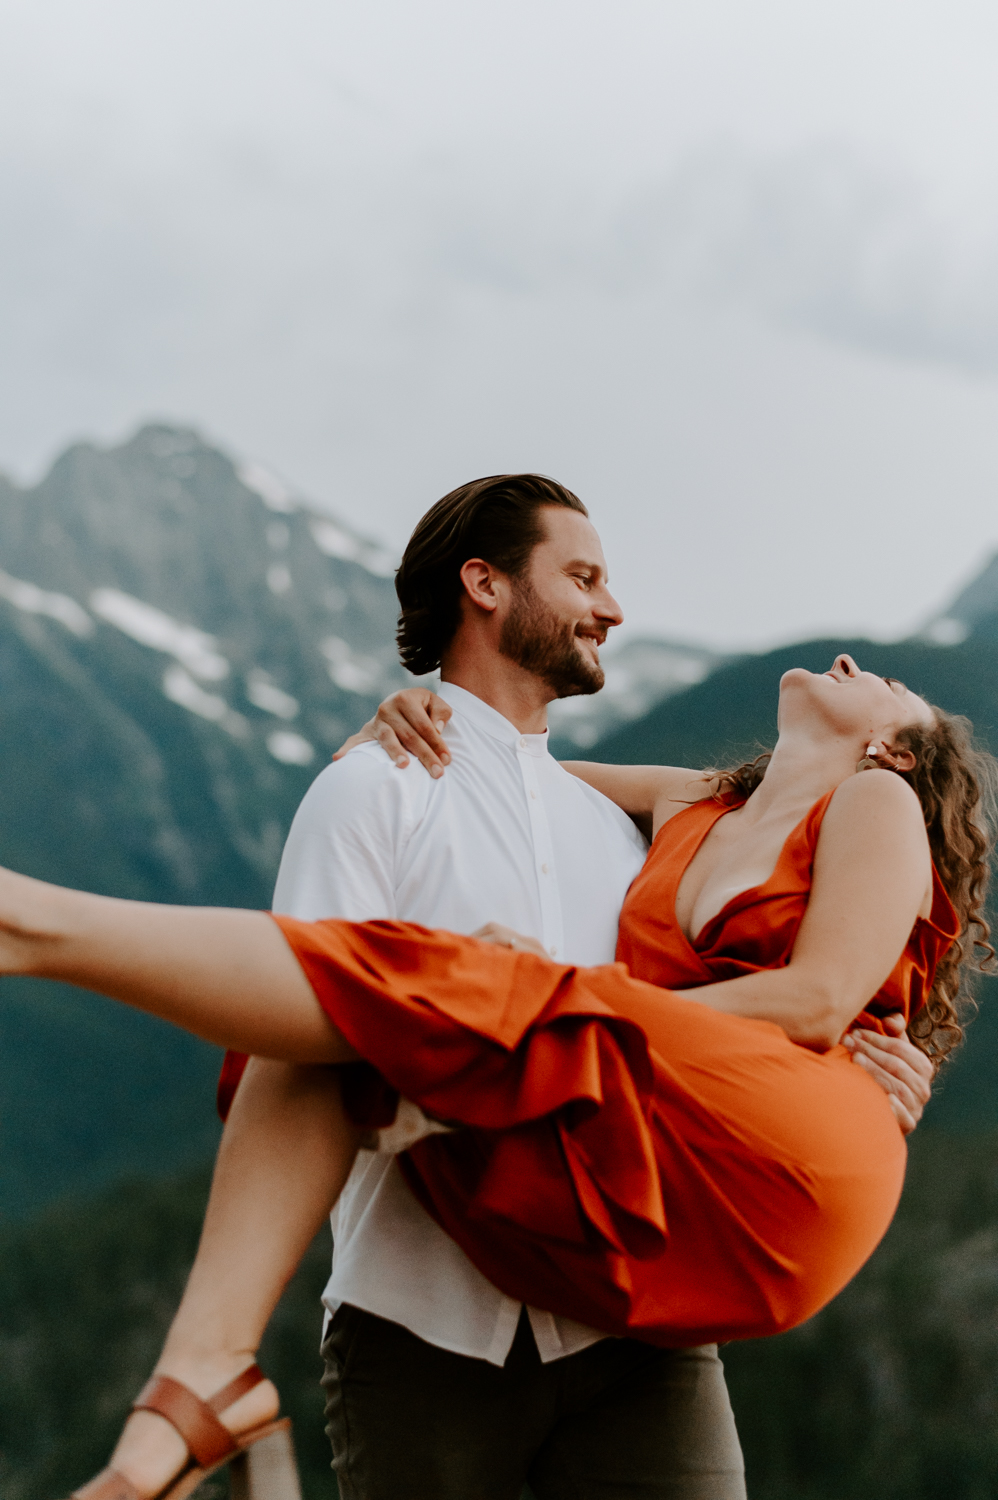 A couple dances outdoors with mountains in the background, the man wearing a white shirt and the woman in a vibrant orange dress, as they share a joyful and carefree moment.